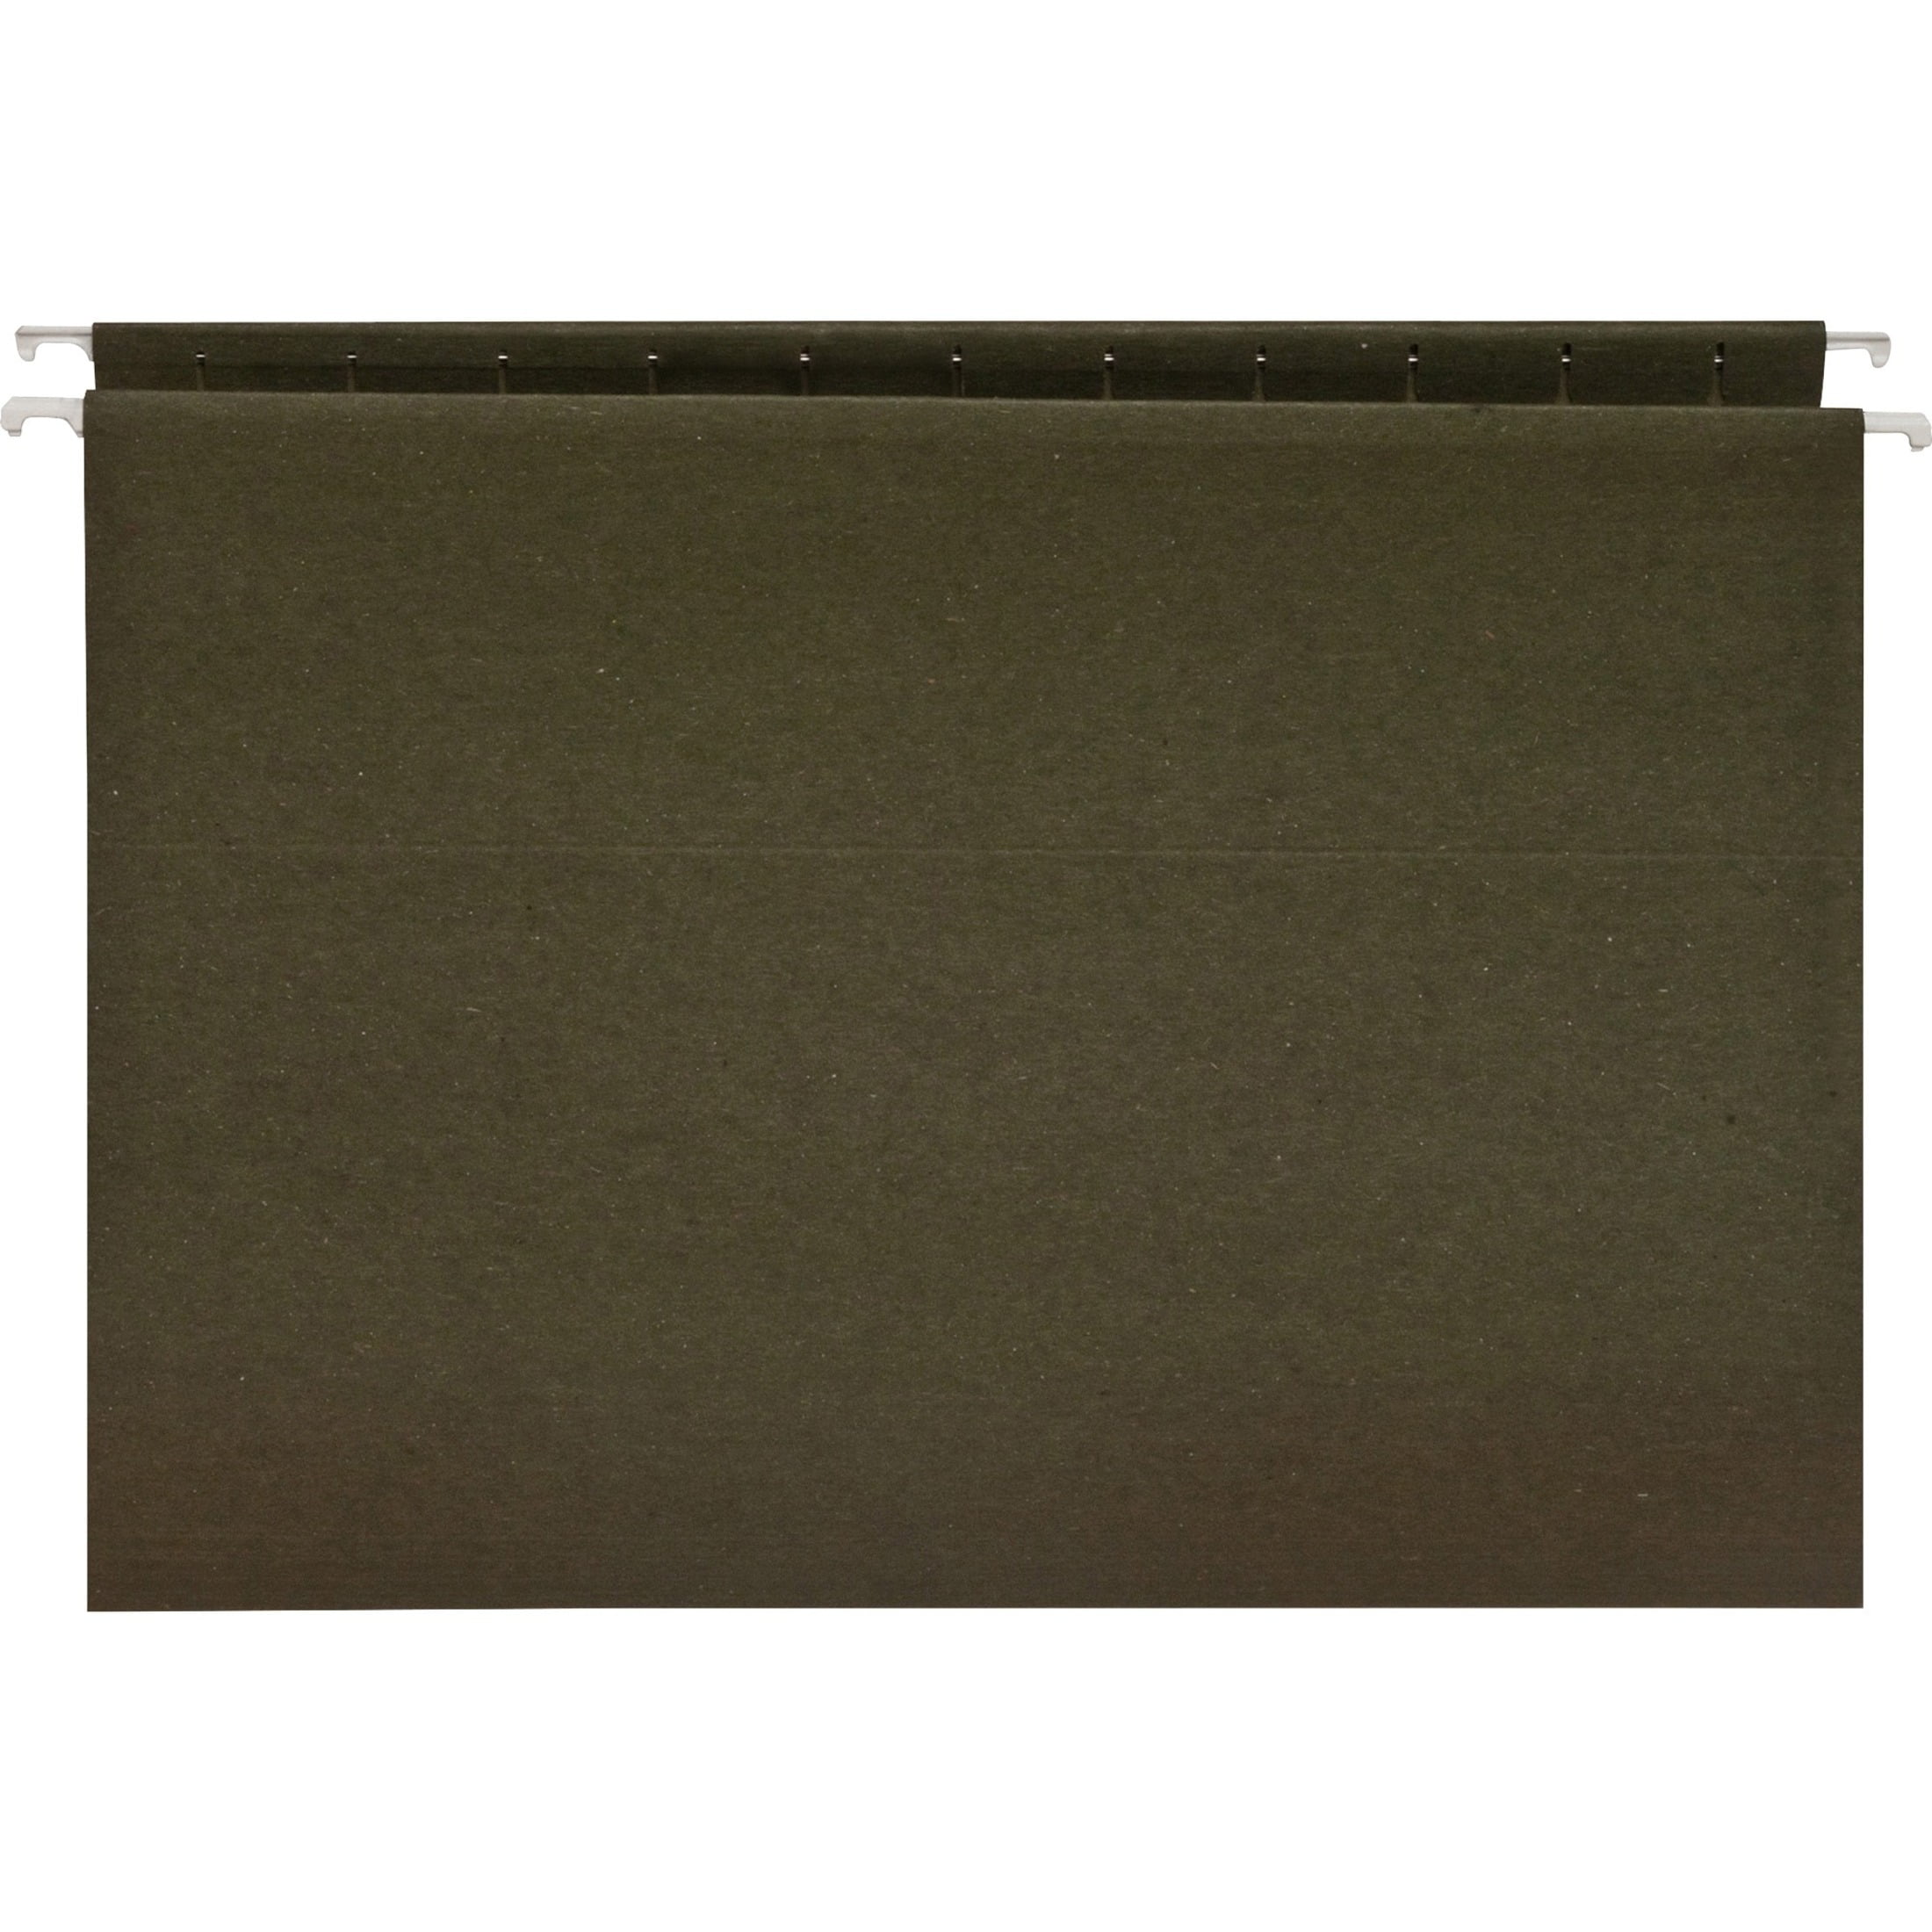 Universal Office Products 15115 File Folder for sale online 